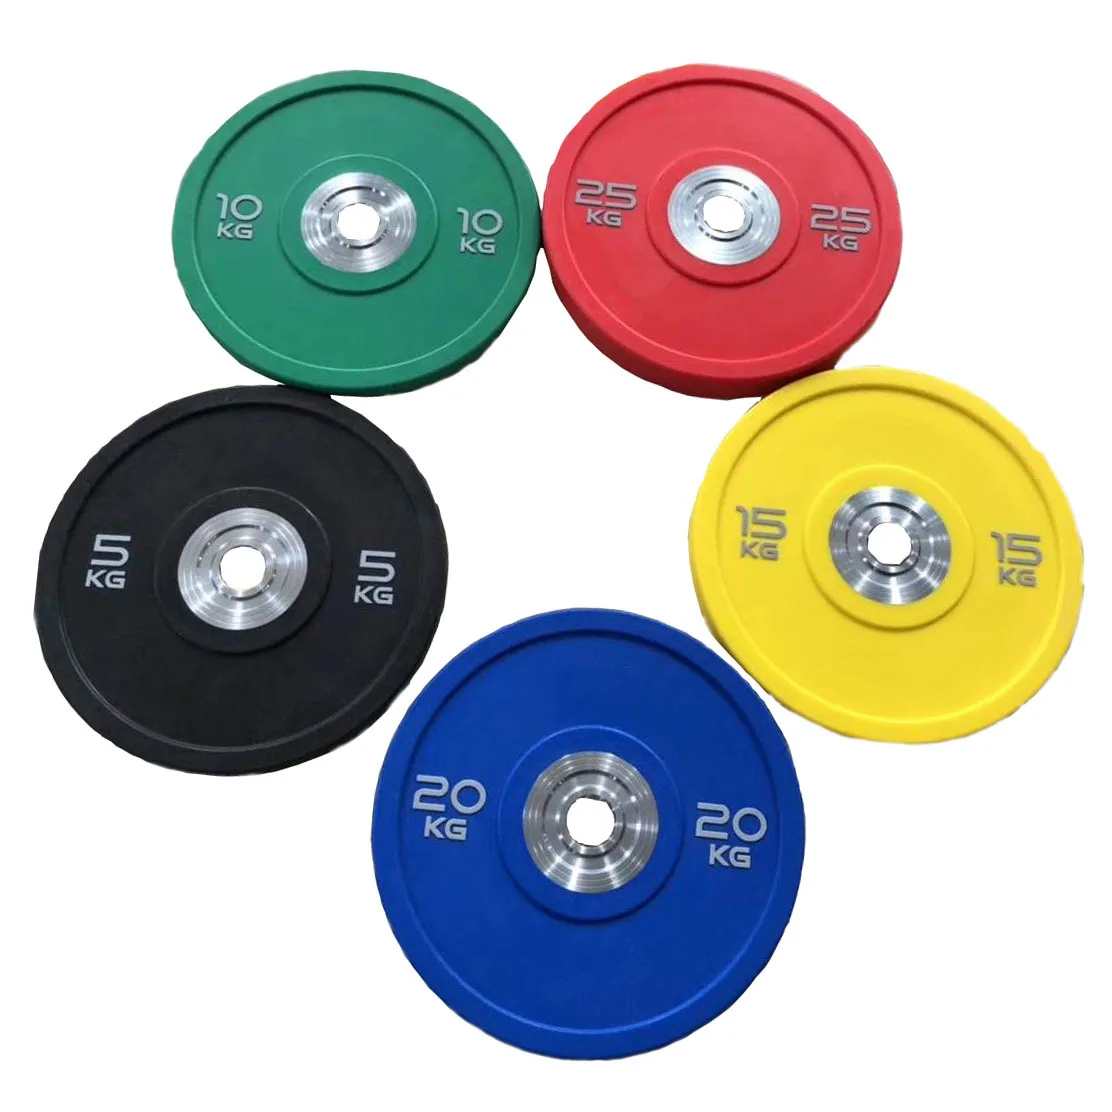 

CPU Coated Barbell Grip Weight Plate for Weightlifting